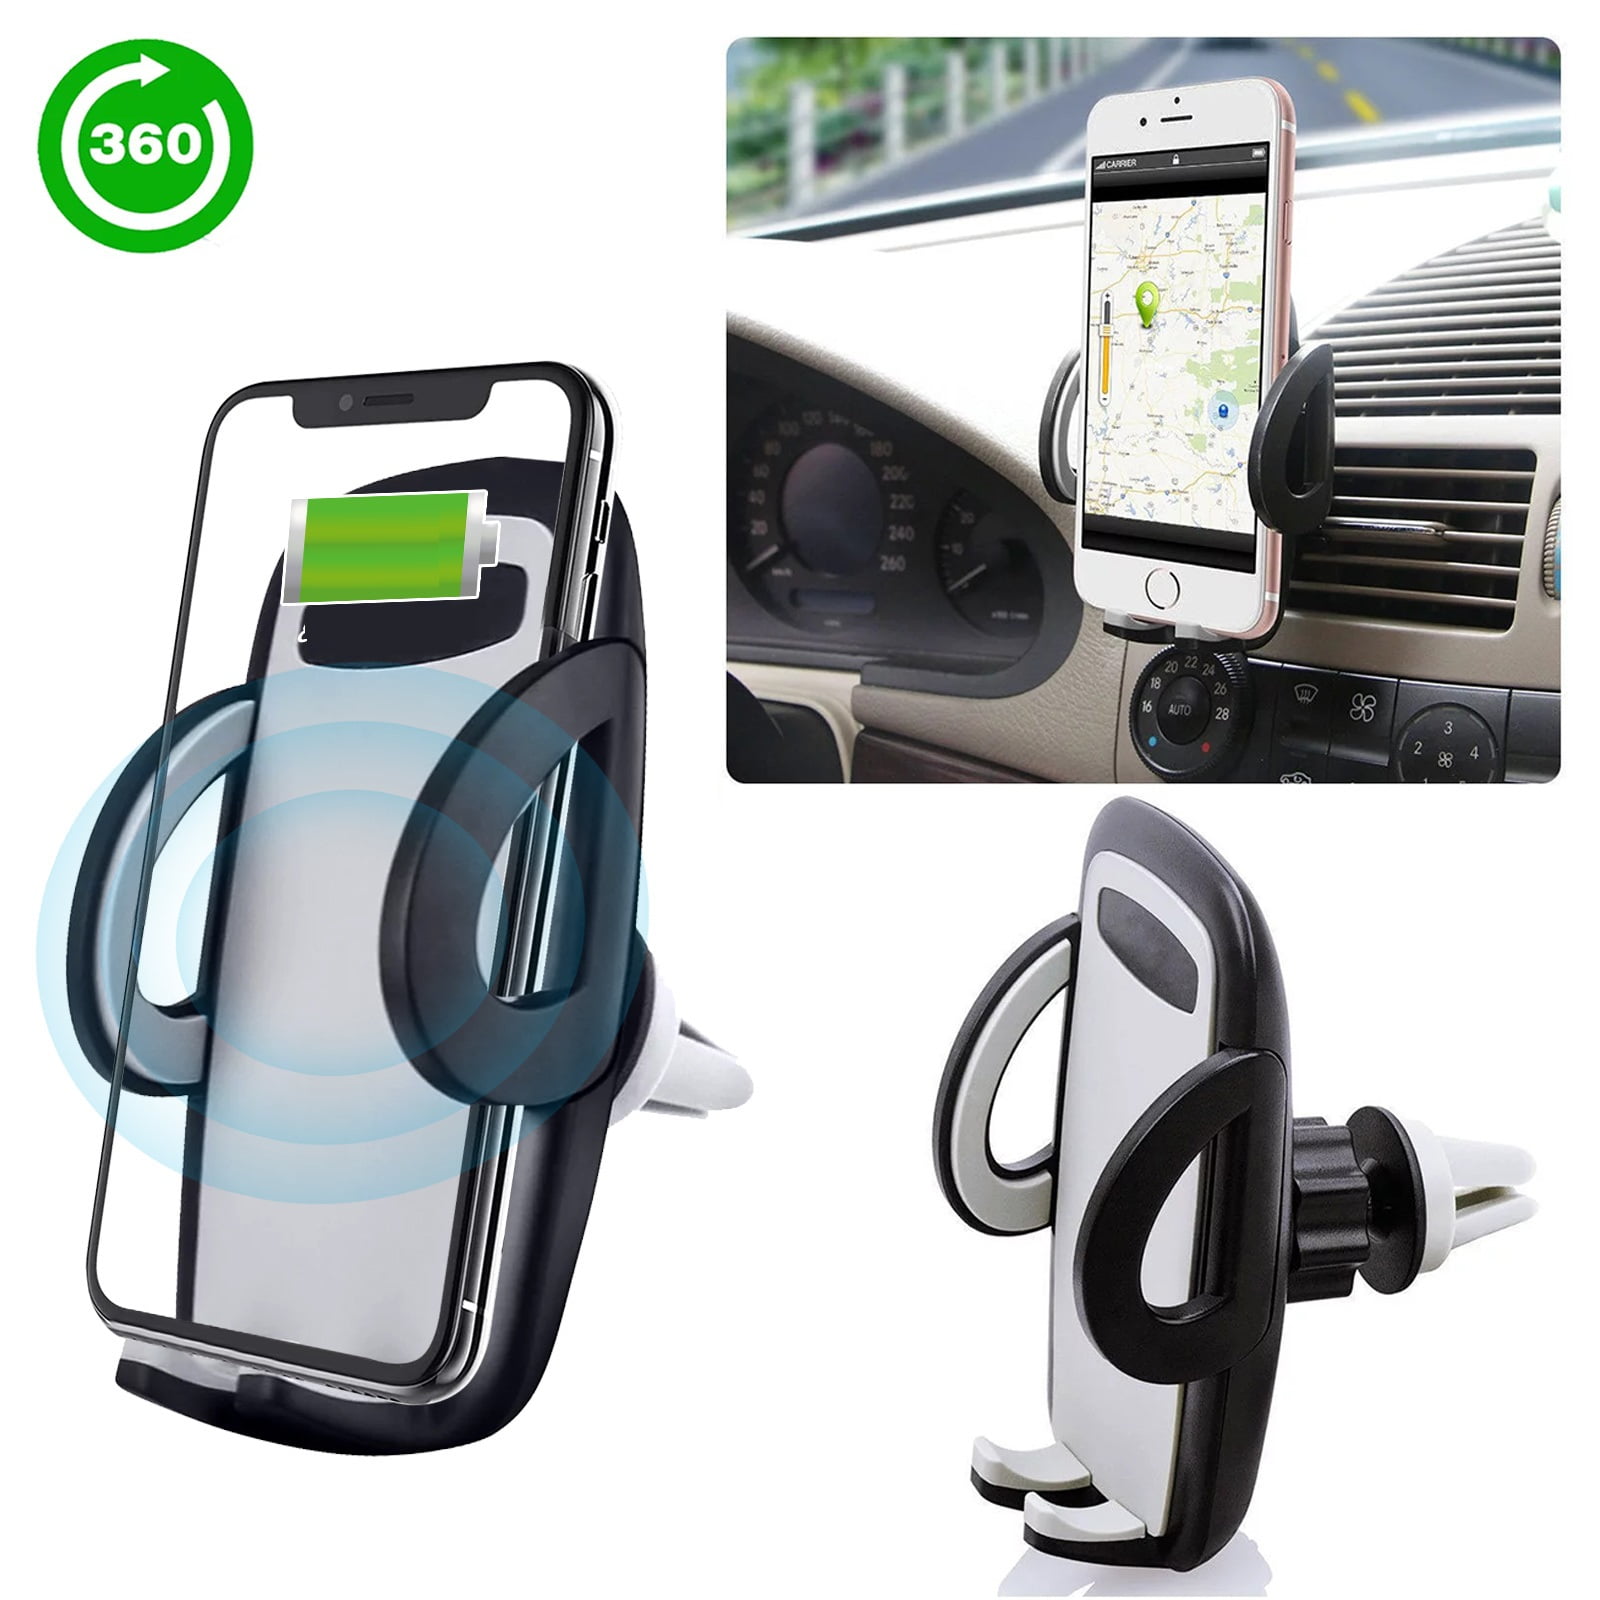 Do you need a car phone mount?